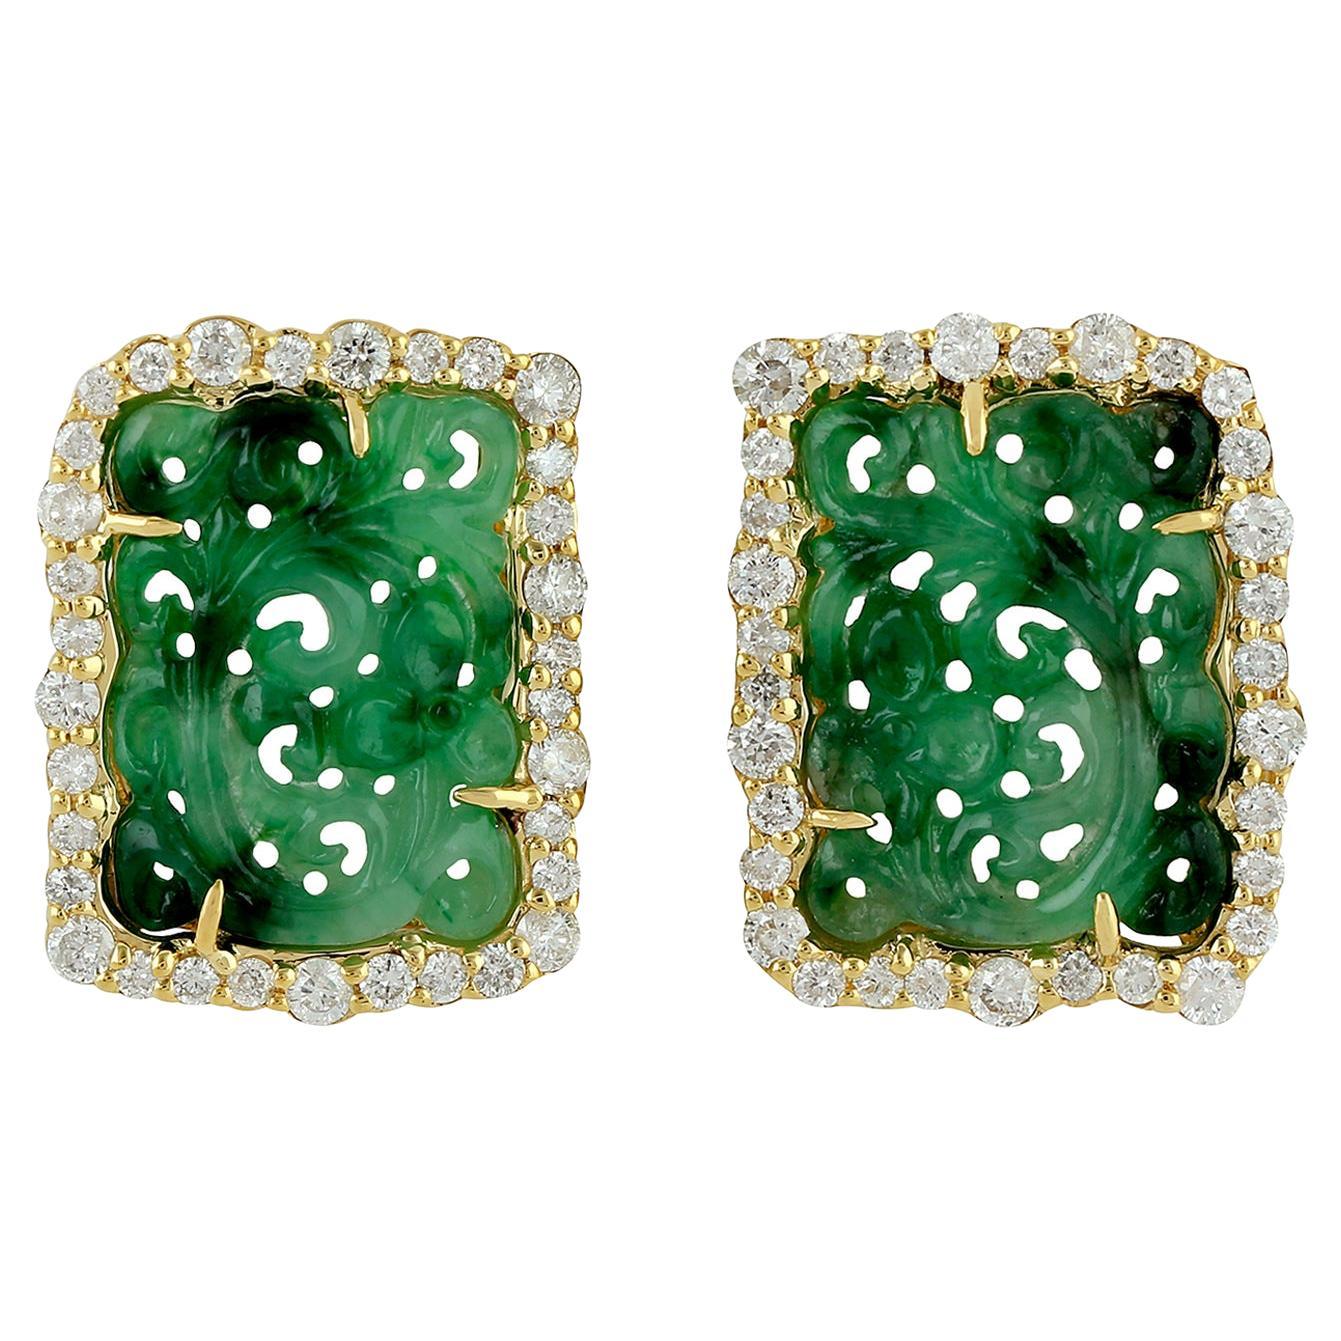 Carved Jade Stud Earrings With Diamonds All Around Made In 18k Yellow Gold